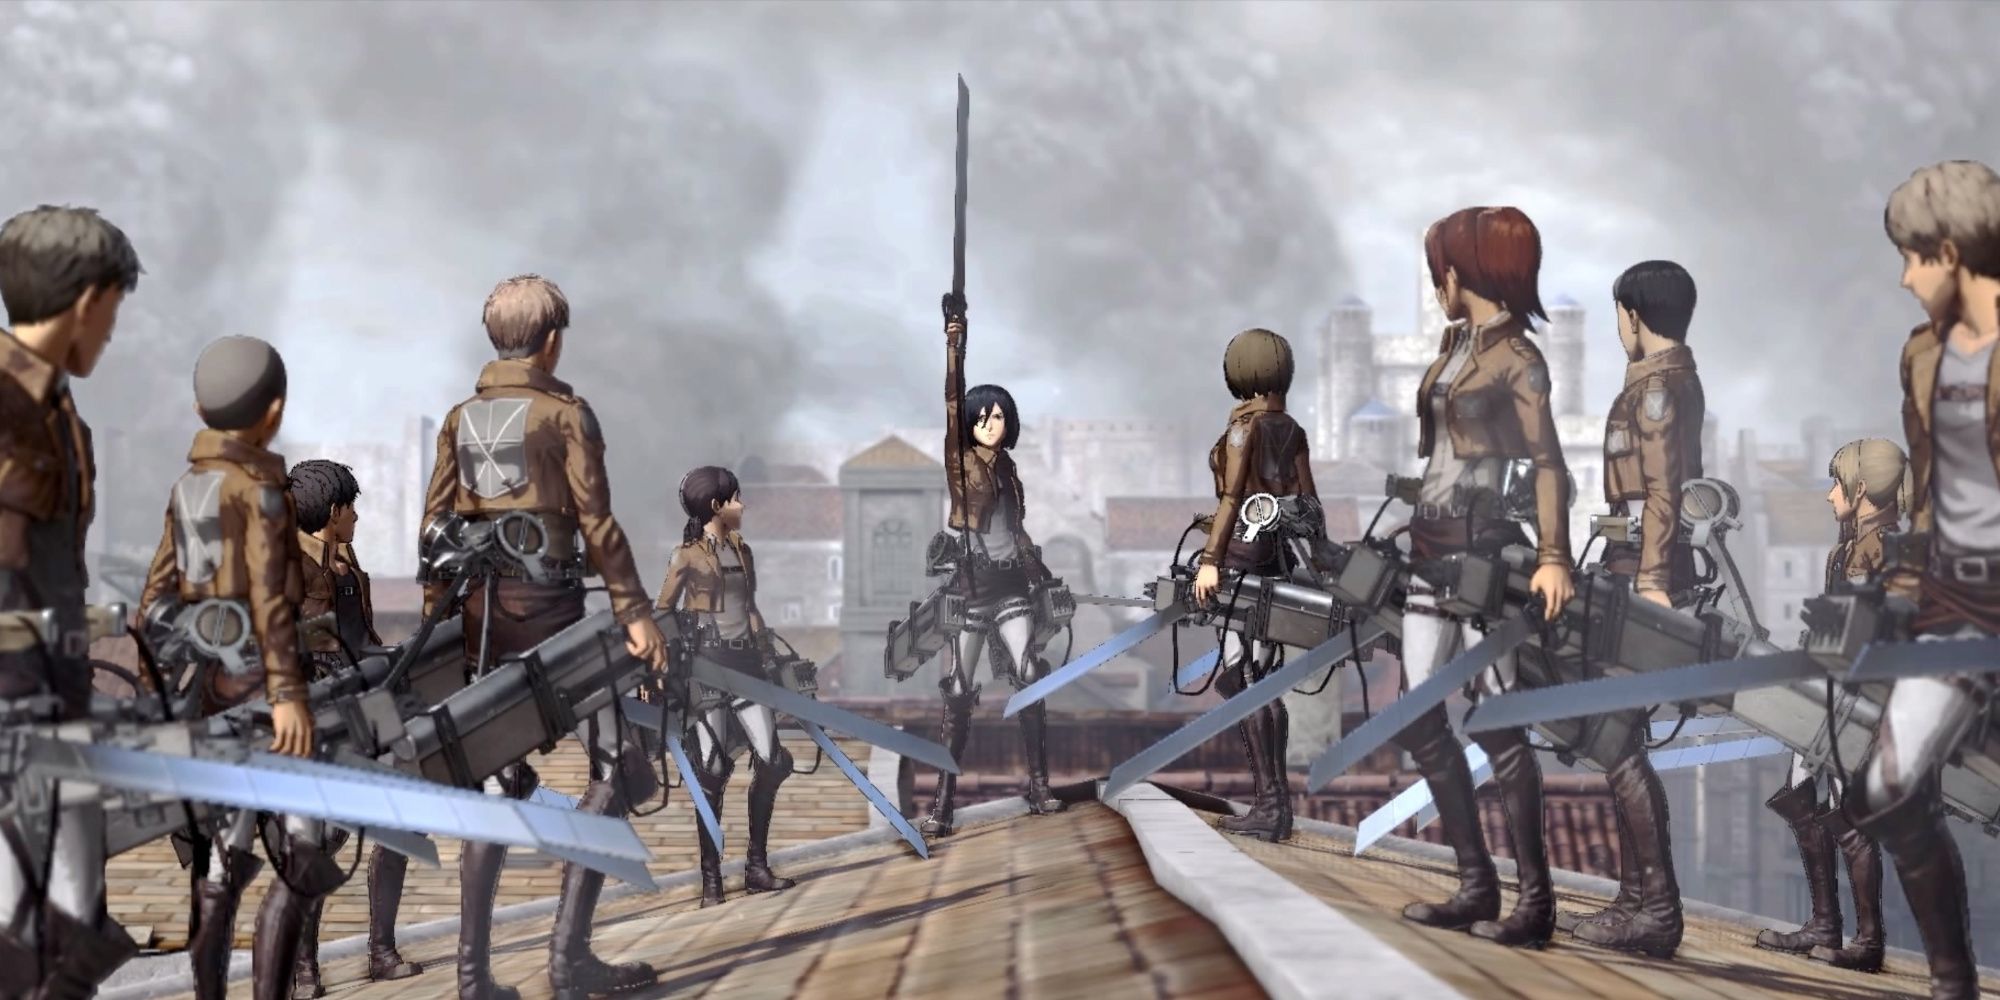 A cutscene featuring characters in Attack On Titan 2016